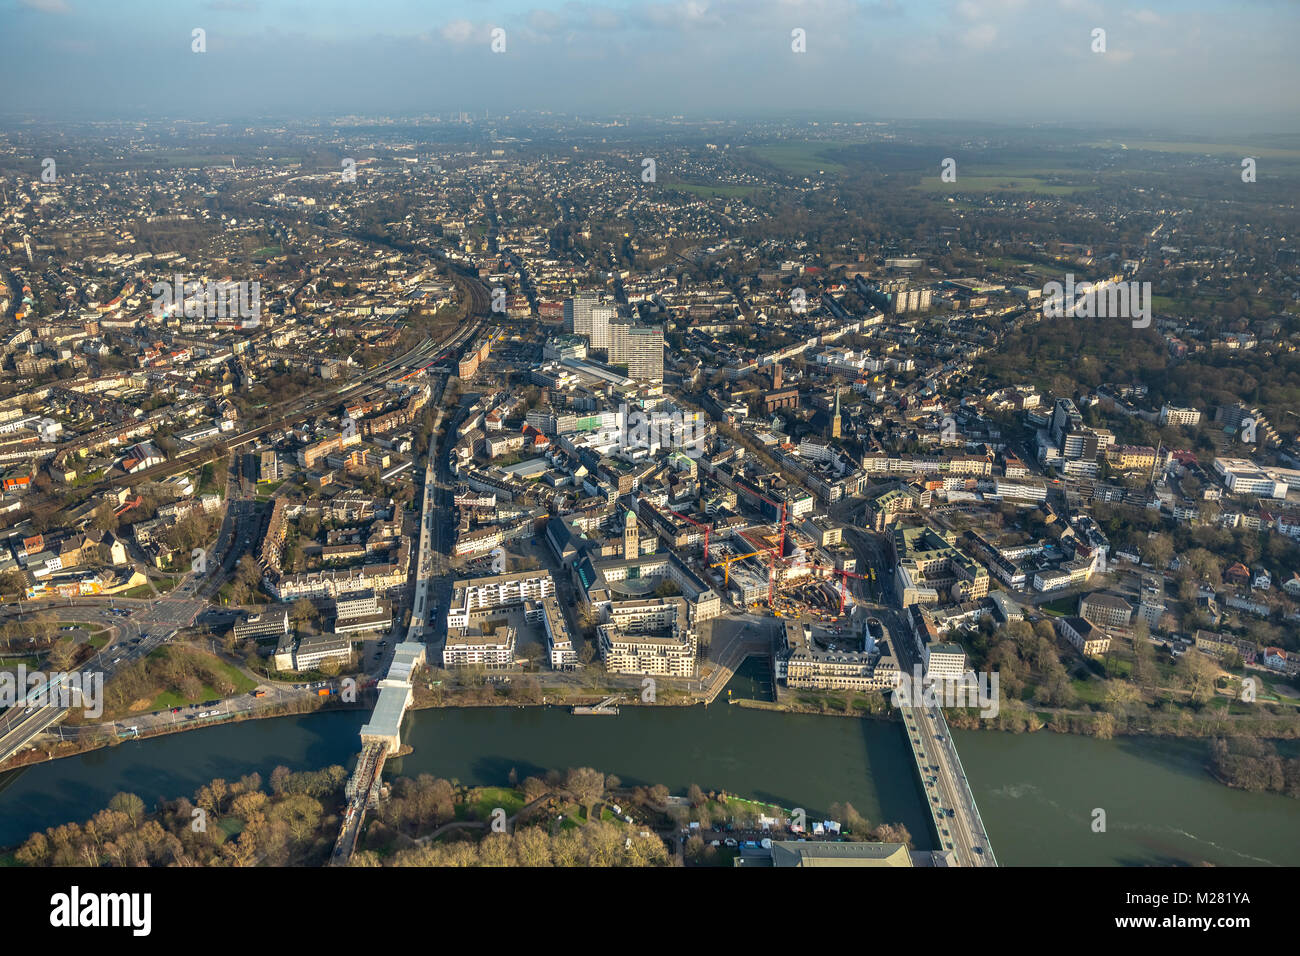 View of city centre with river Ruhr, Mülheim an der Ruhr, Ruhr area, North Rhine-Westphalia, Germany Stock Photo